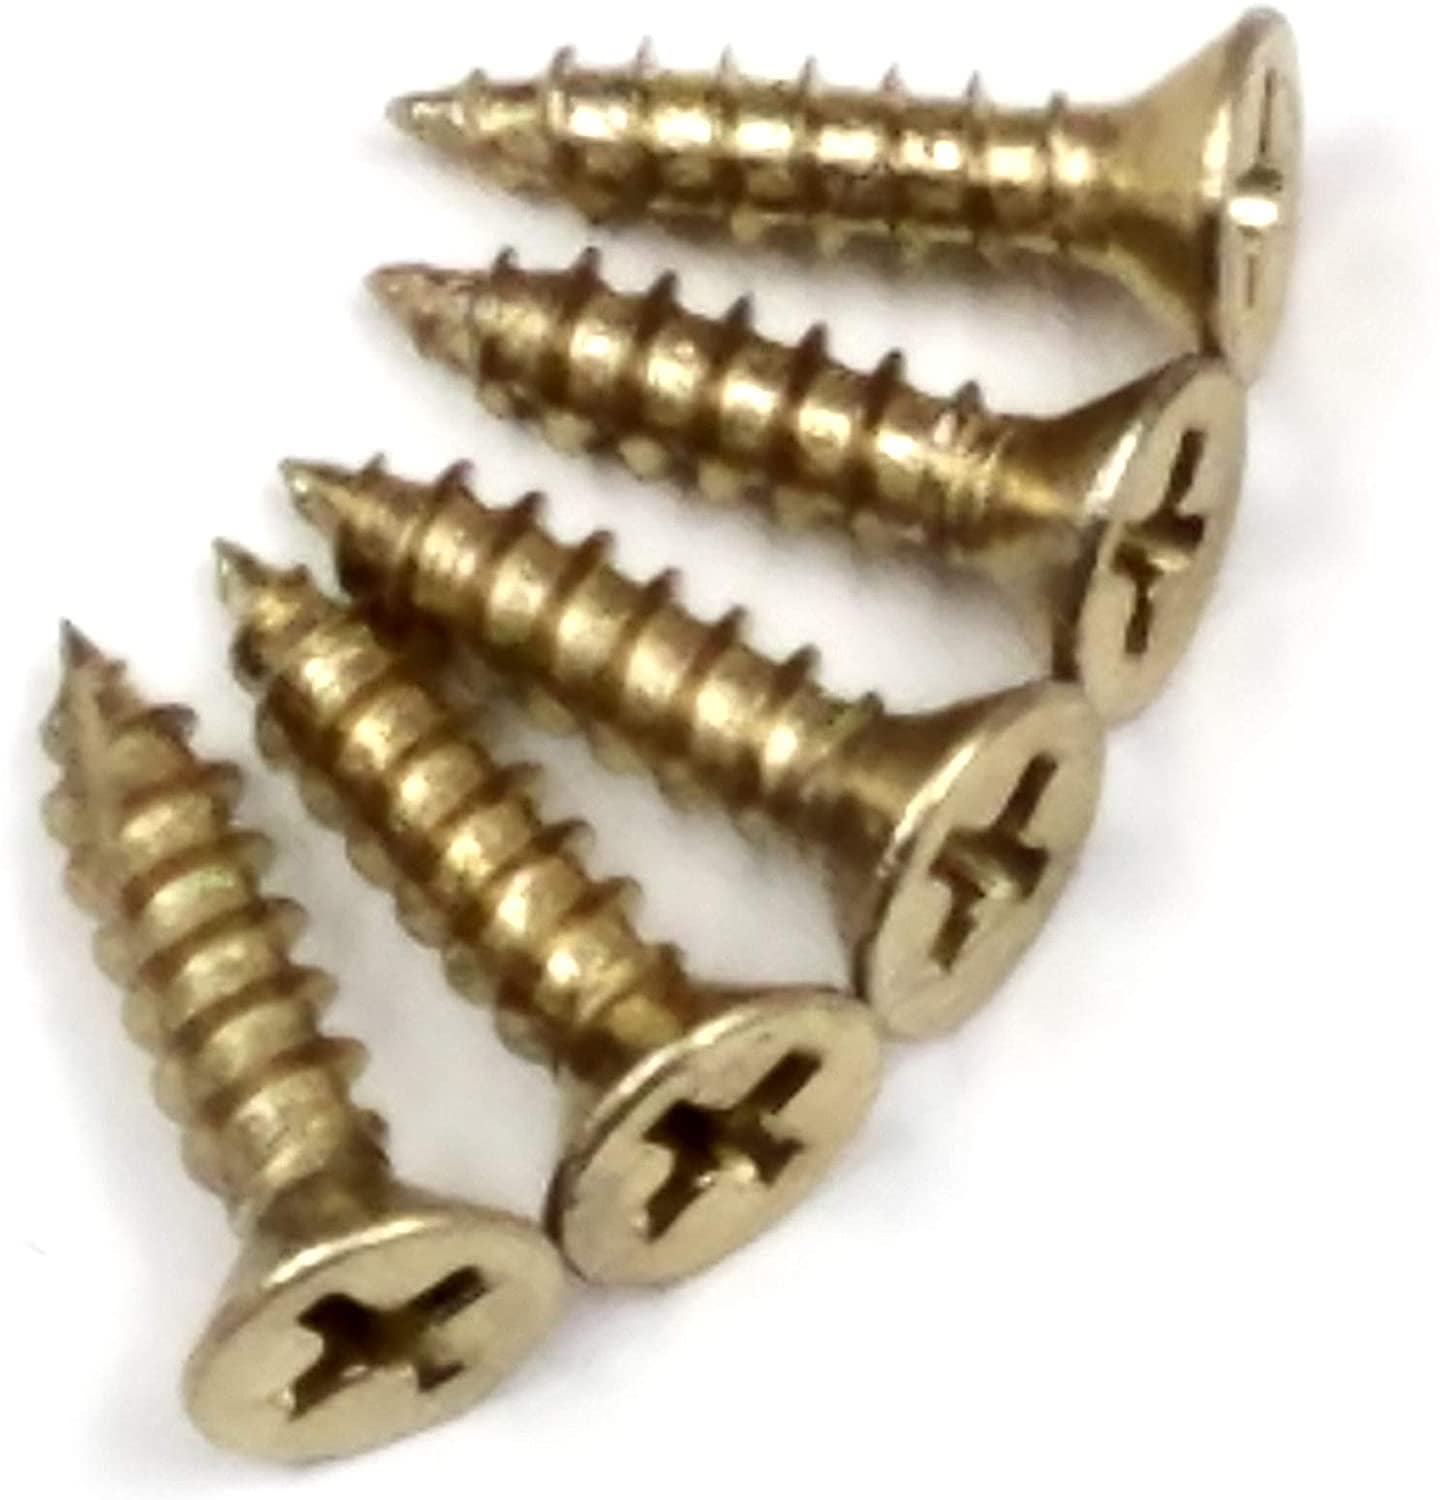 Fly Cut Wood Screws For Door Hinges - Polished Bright Brass - #9 X 3/4" Inch